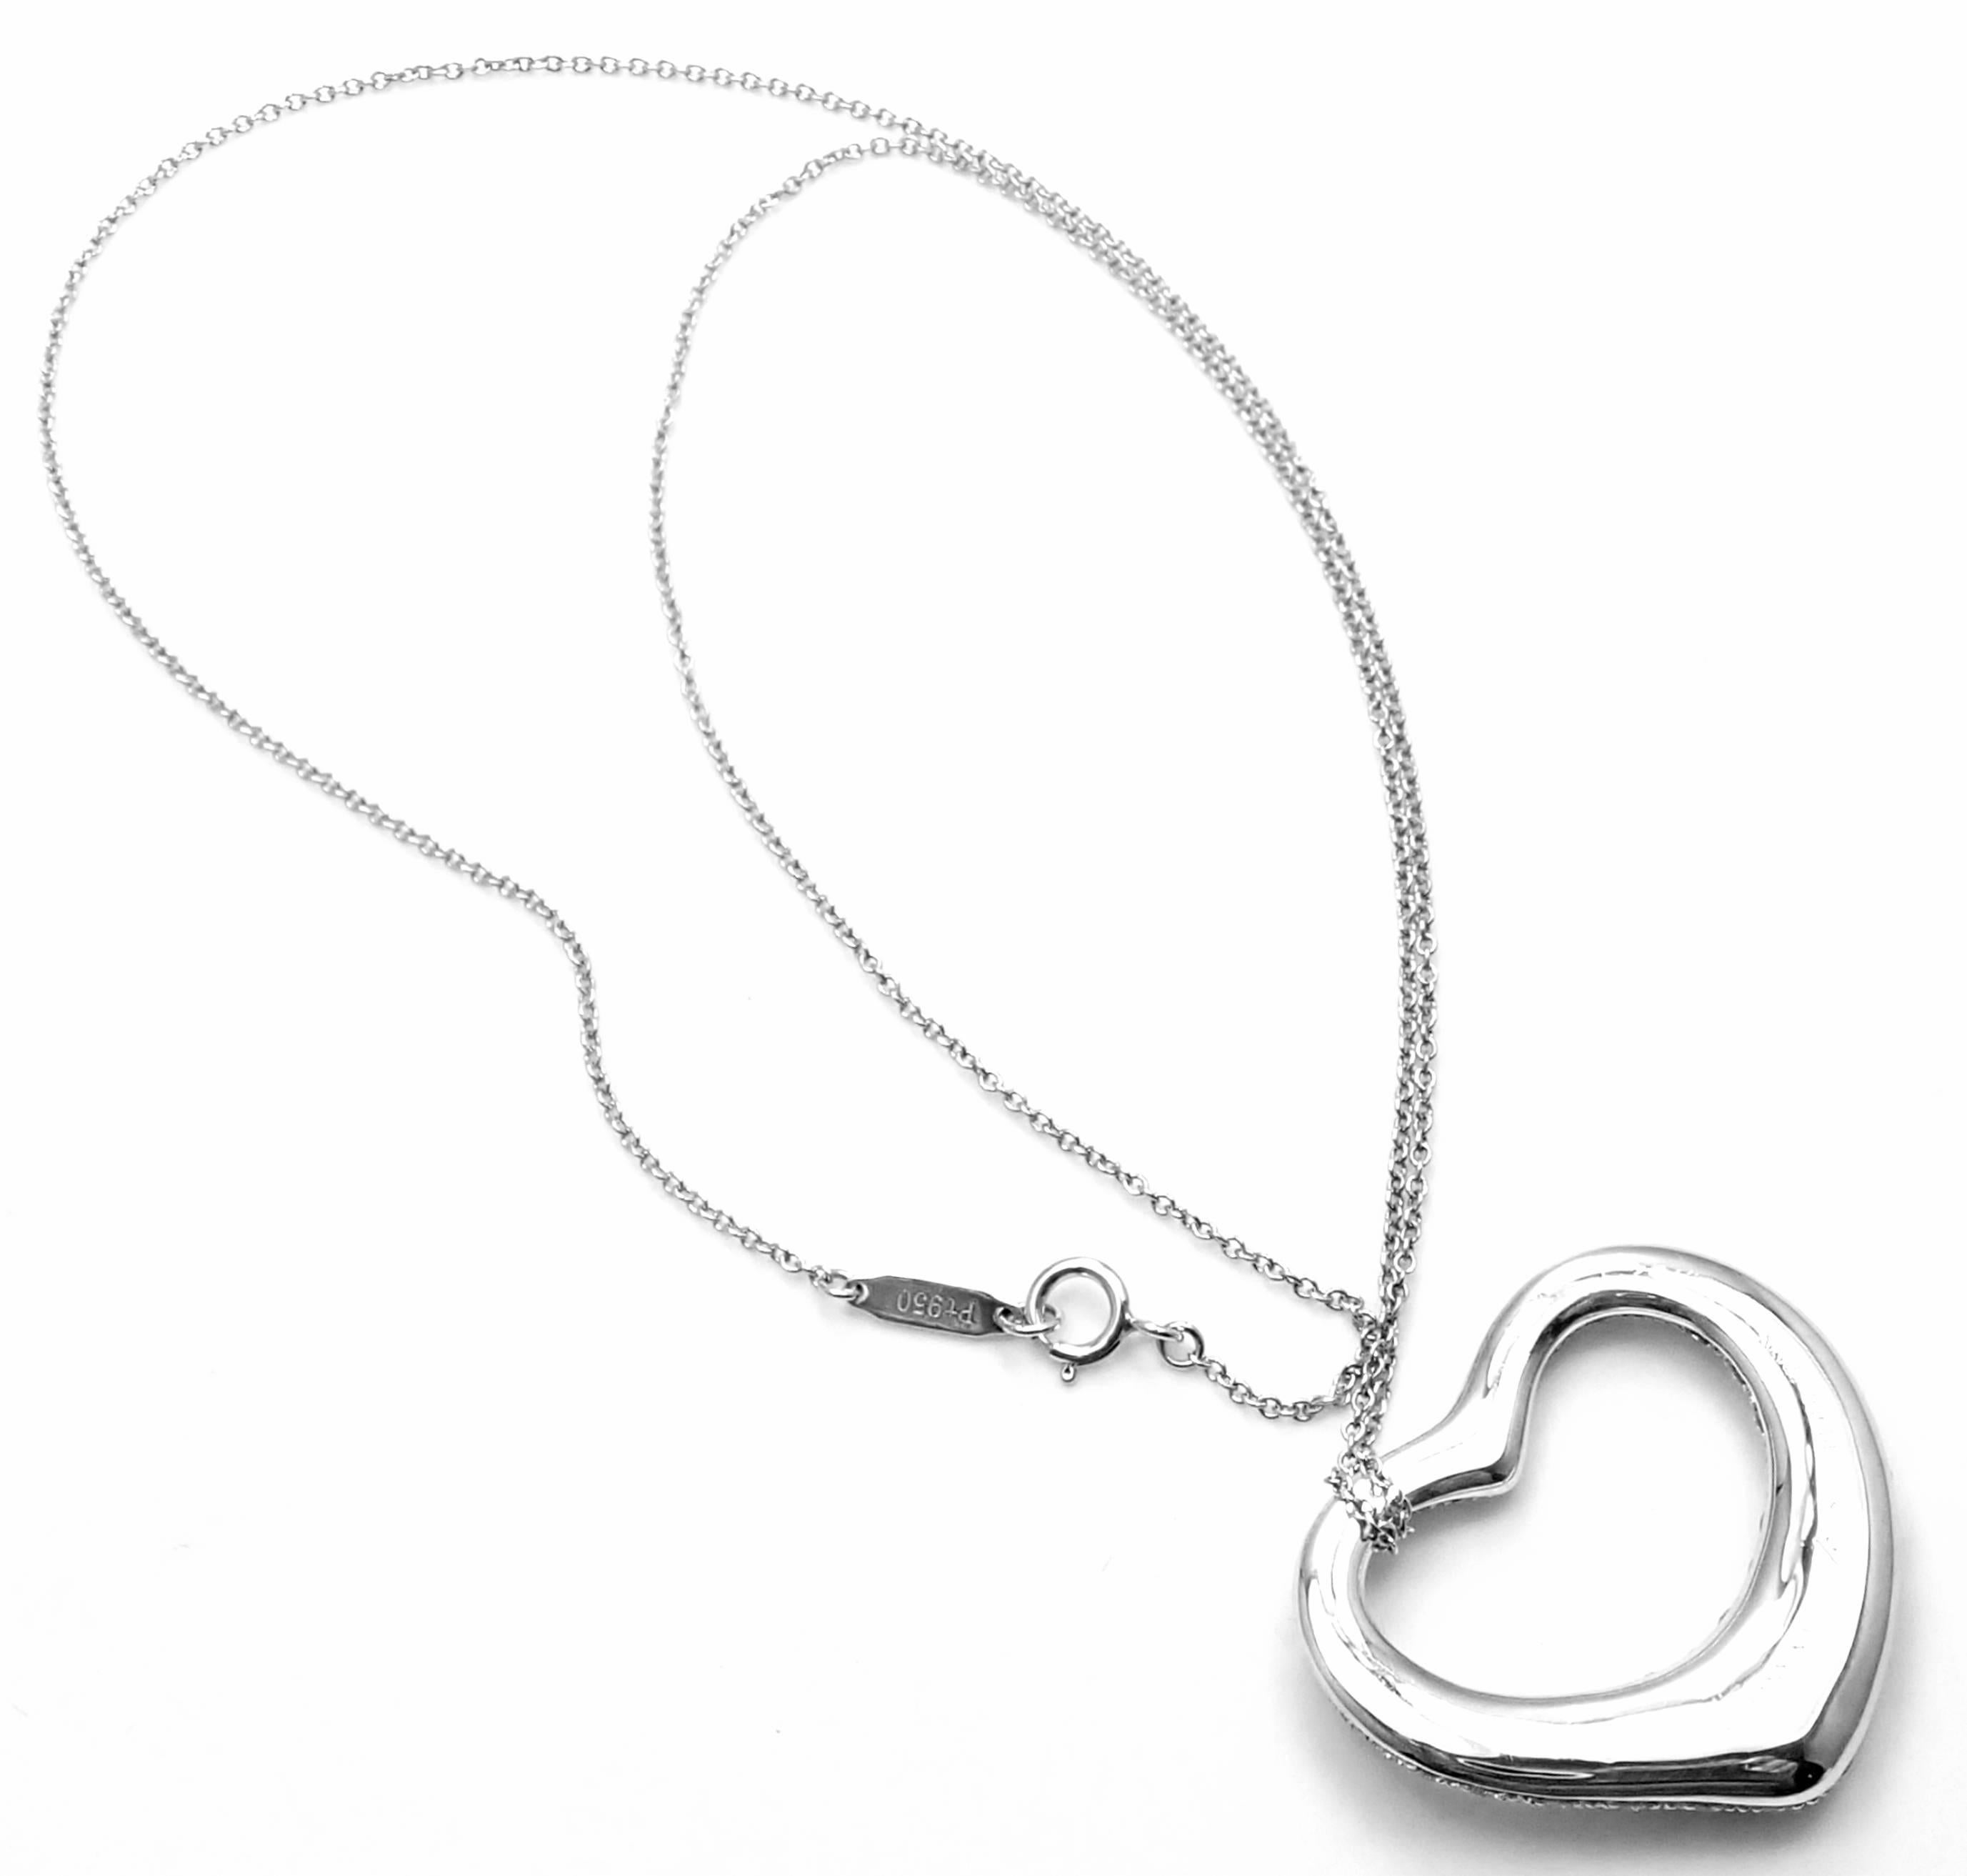 tiffany open heart necklace with diamond